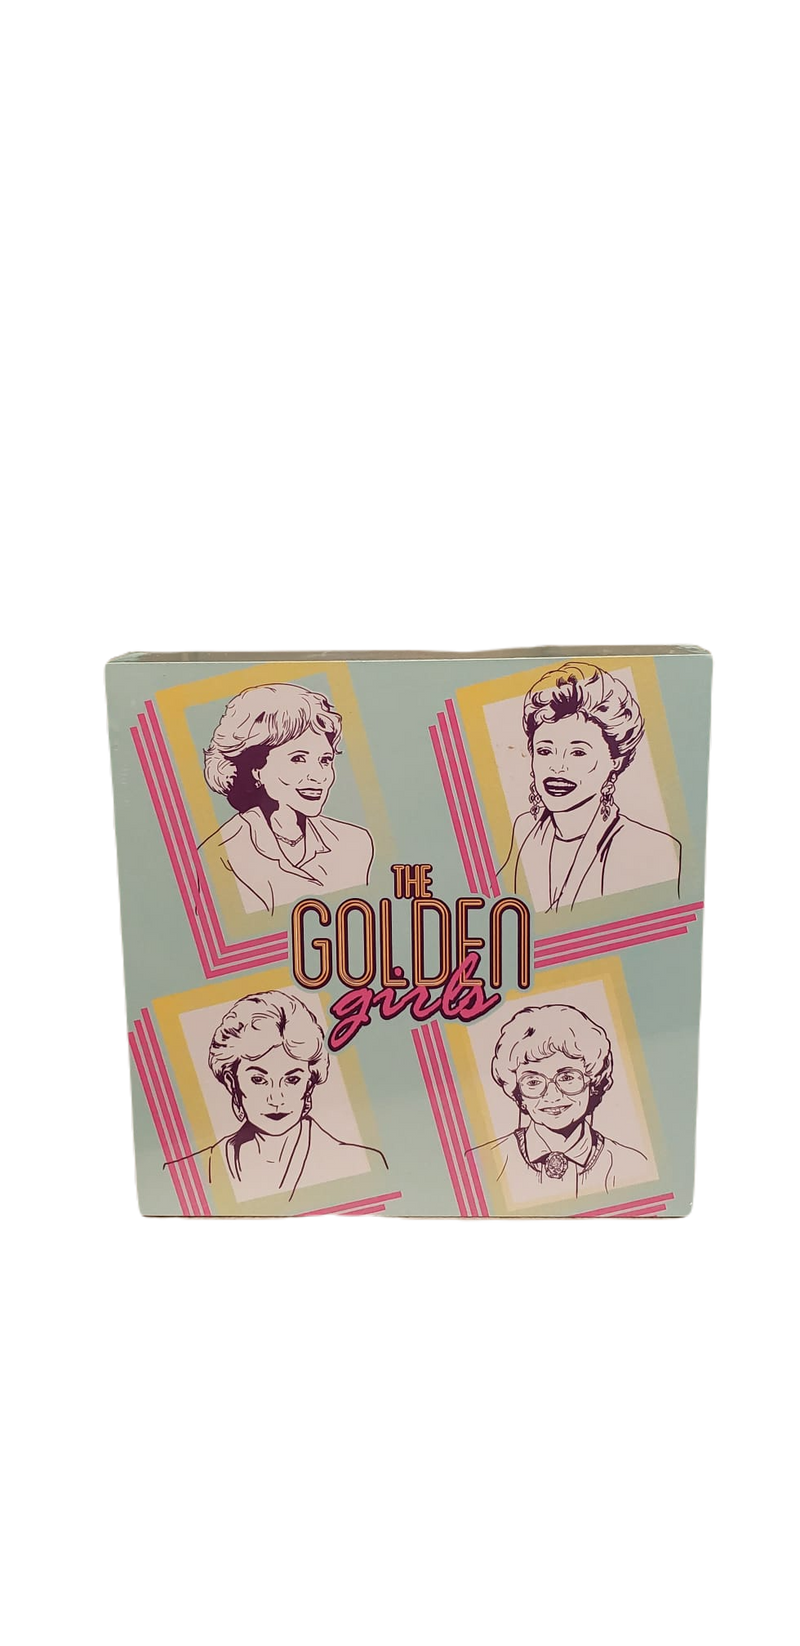 The Golden Girls - Retro Squared 6" x 6" x 1.5" Box Wall Sign